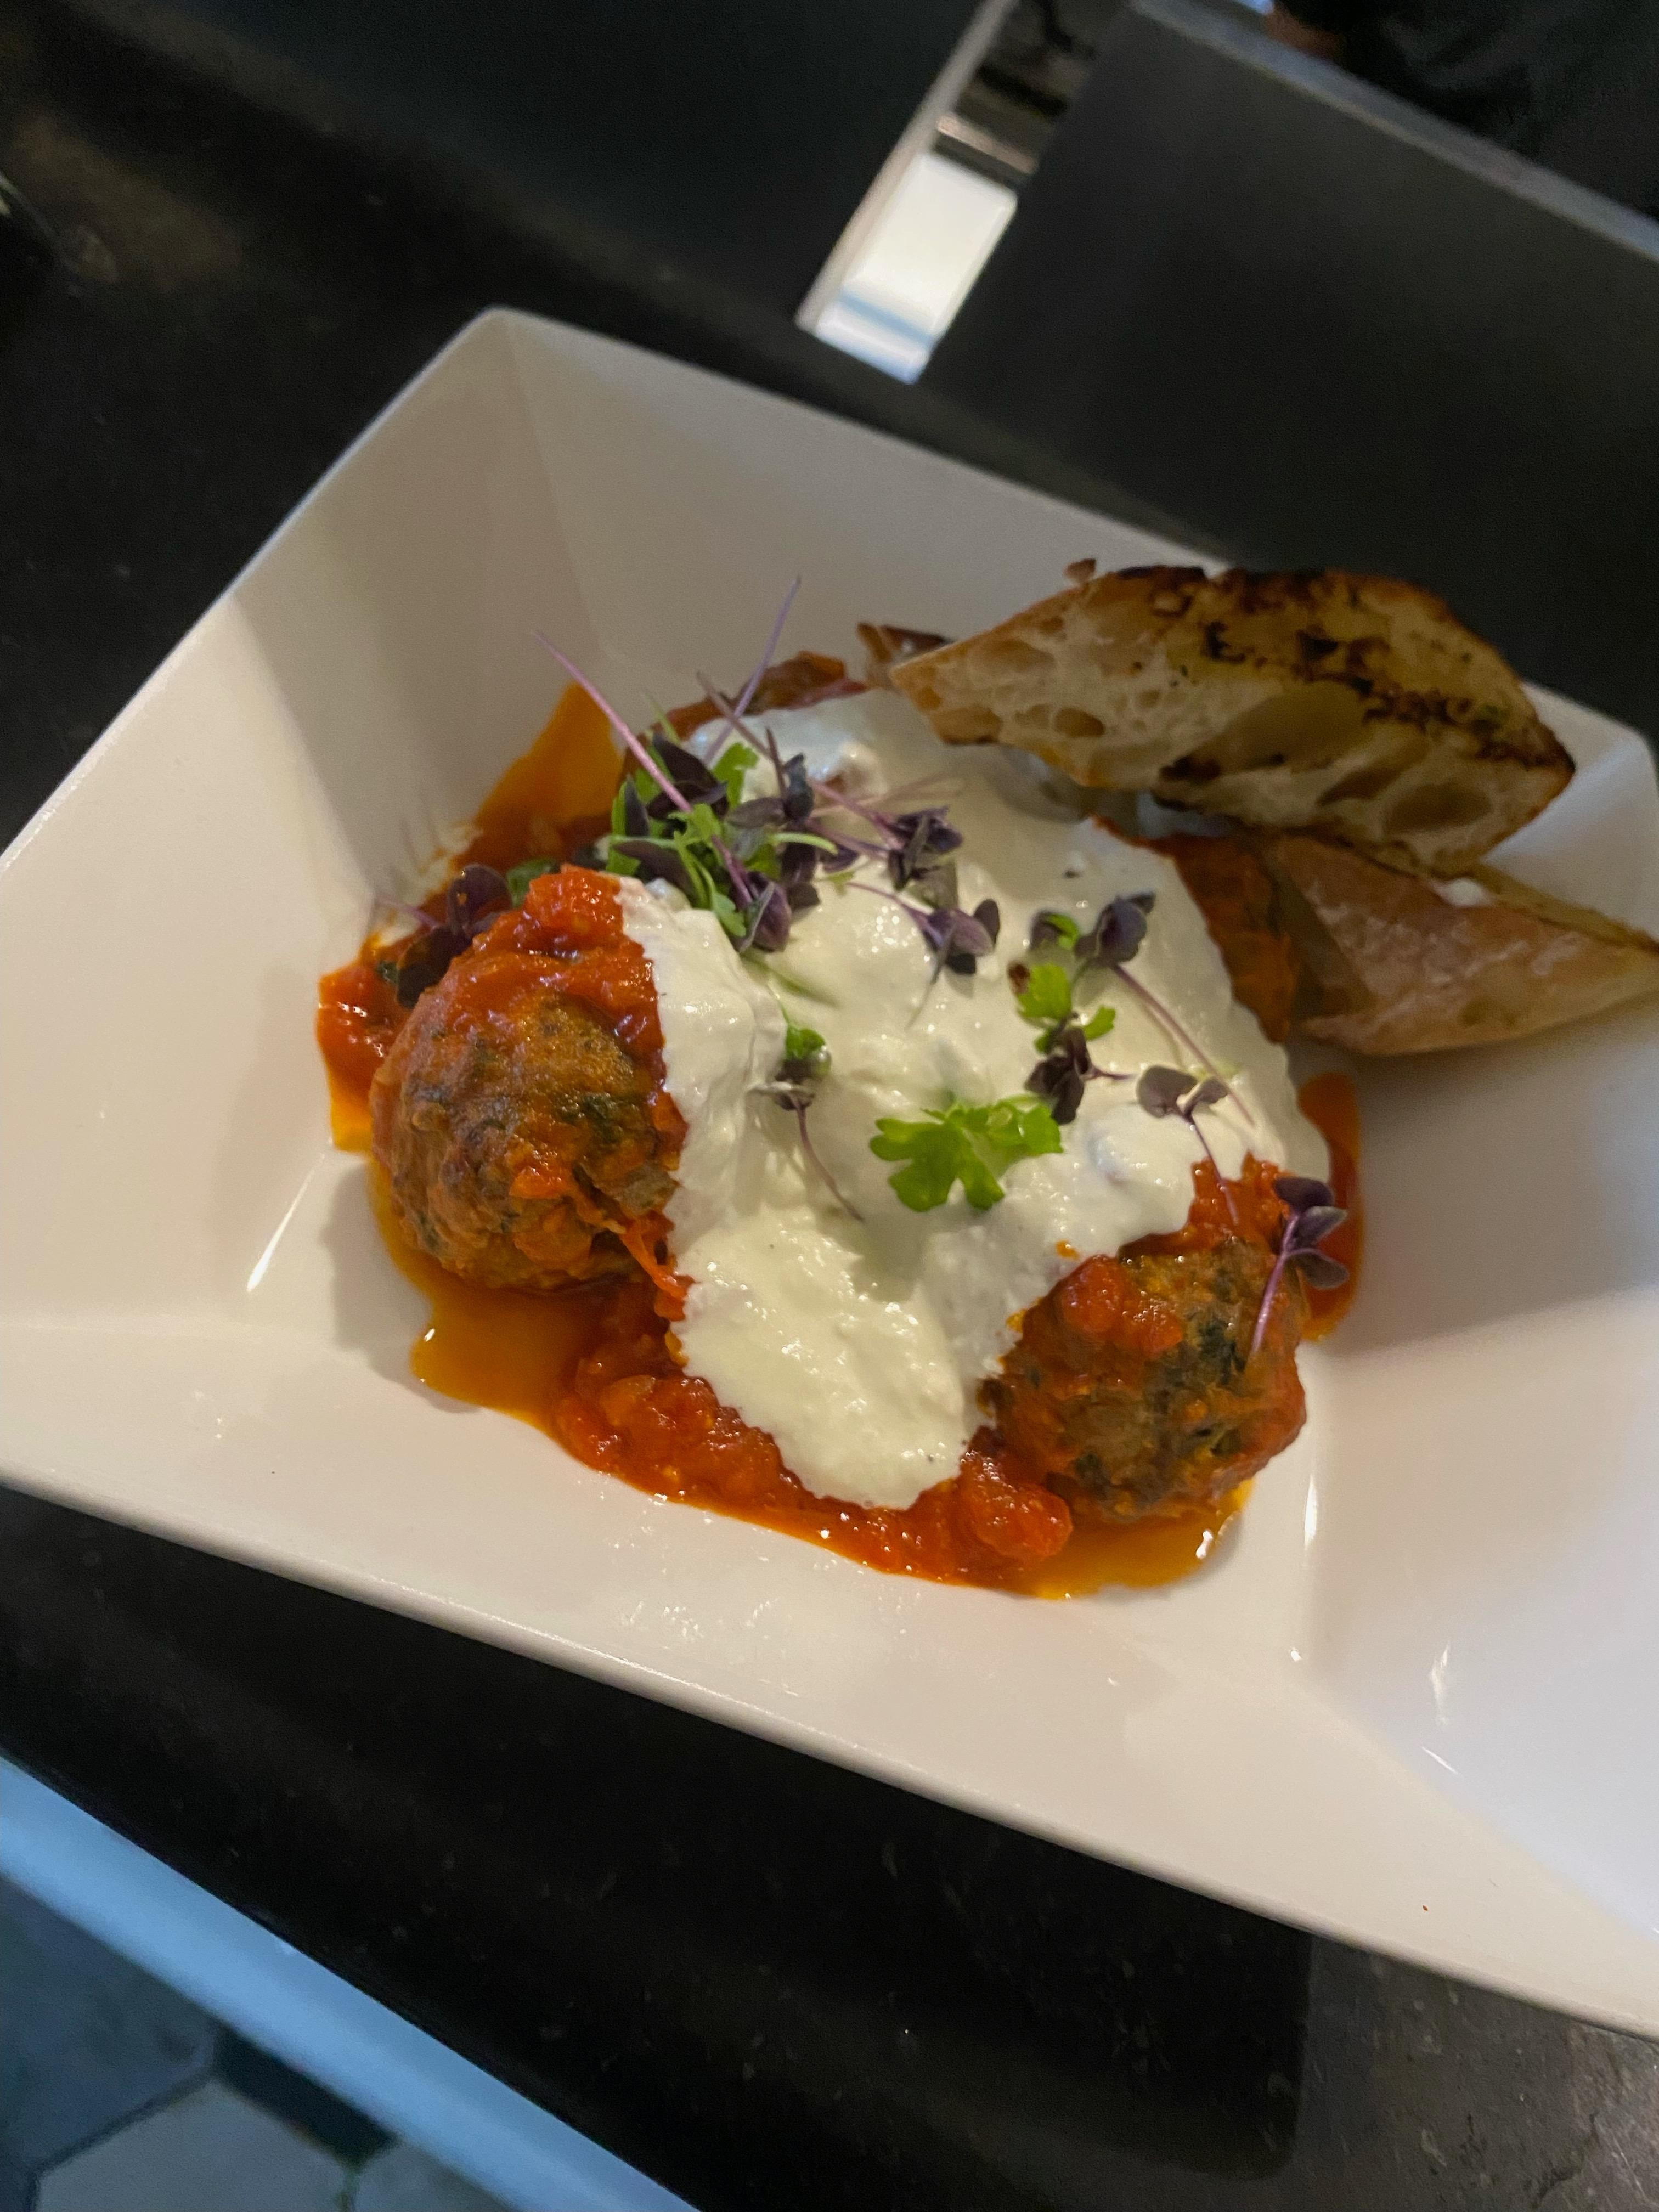 PORK AND VEAL MEATBALLS